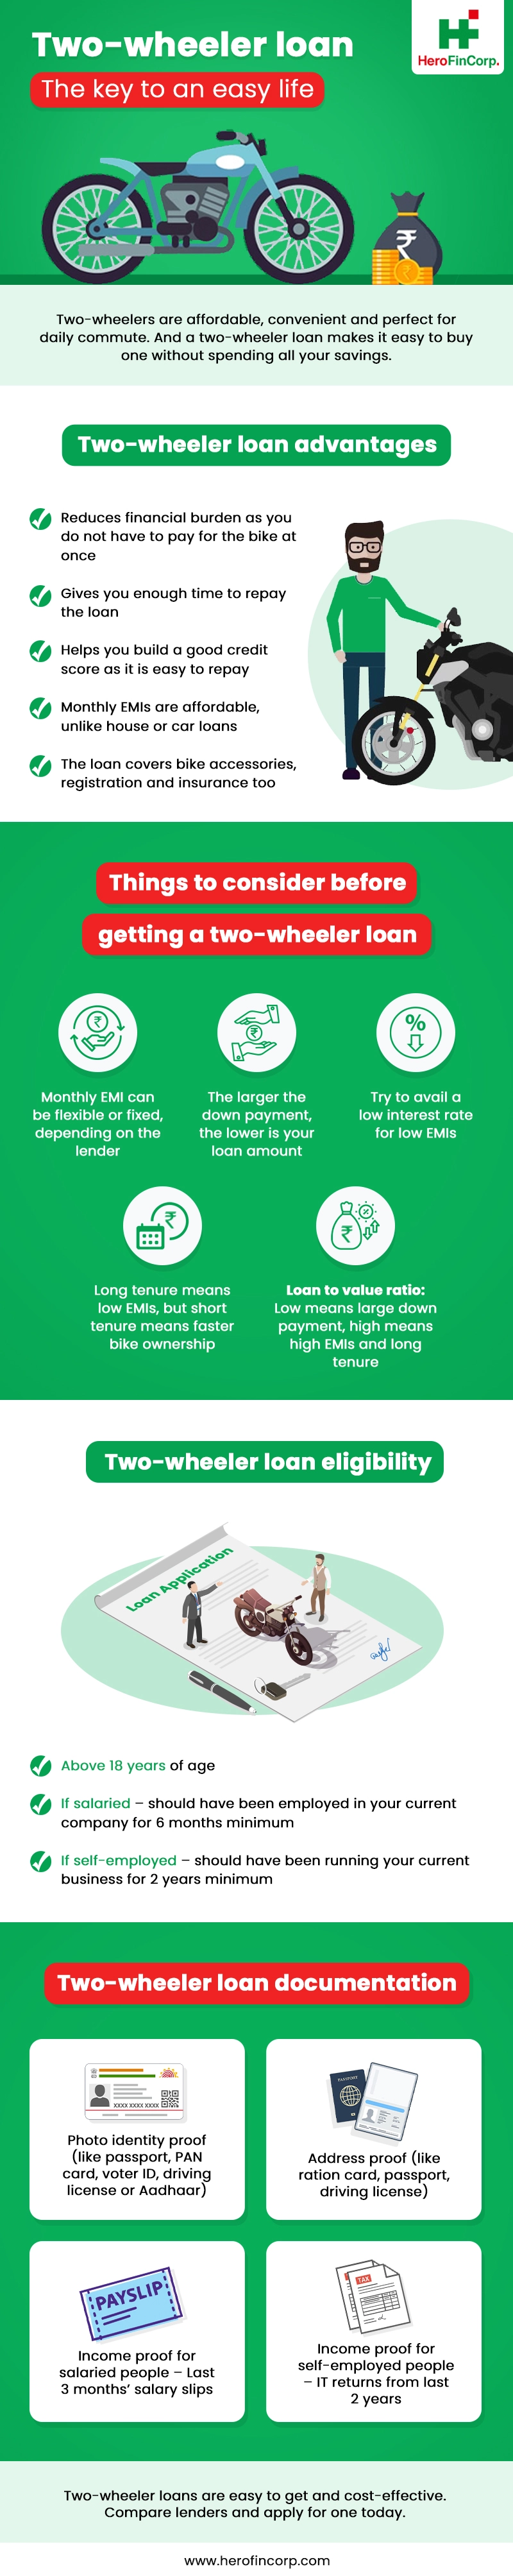 two-wheeler-loan-the-key-to-an-easy-life